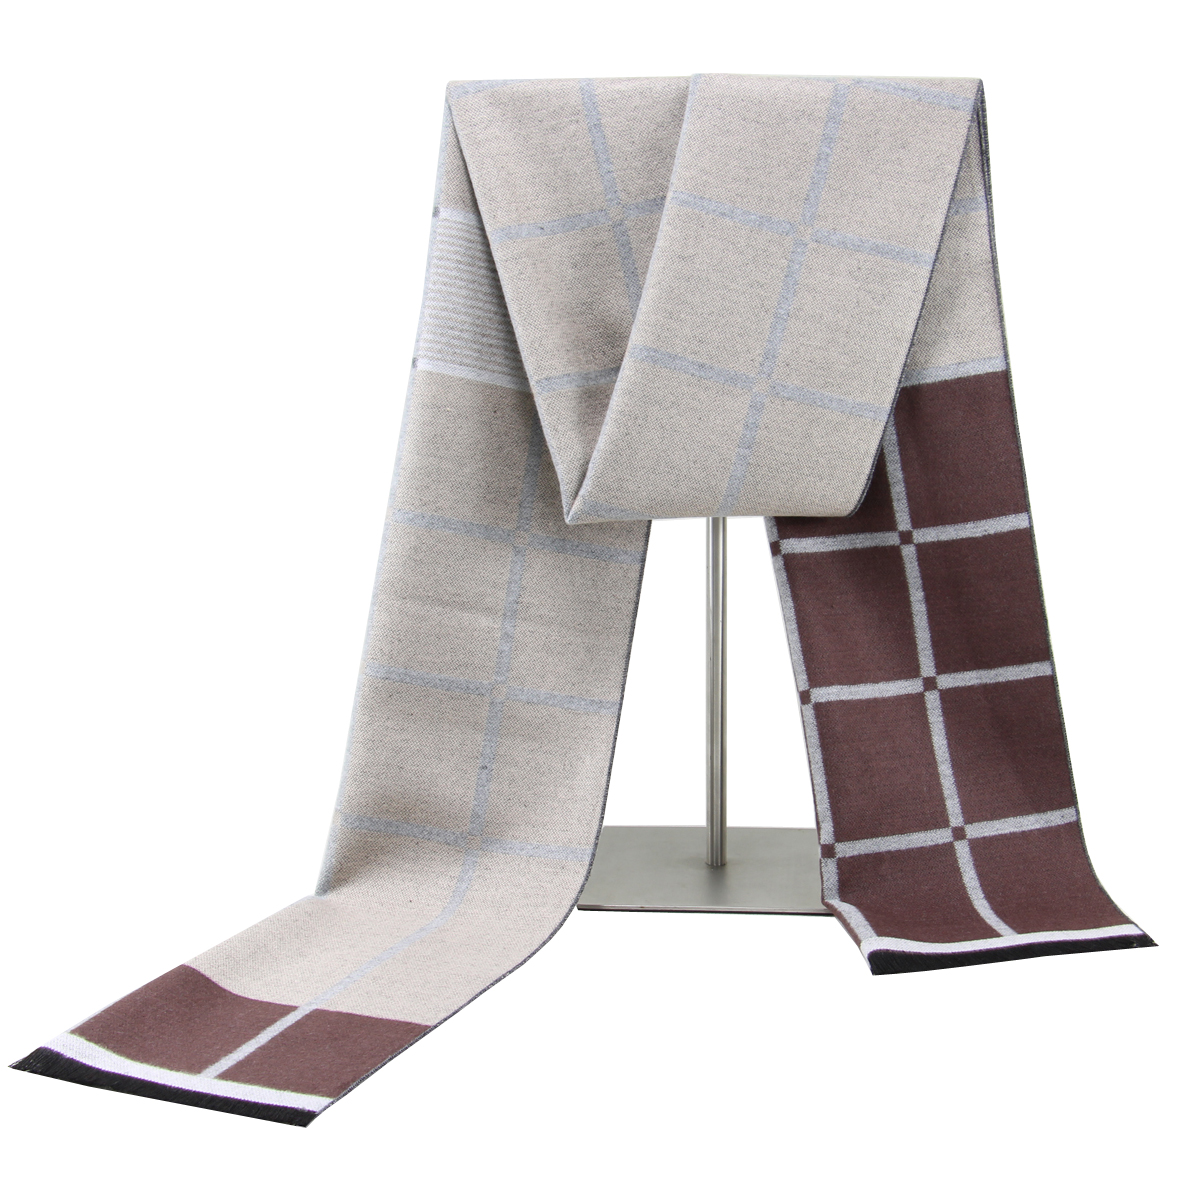 Low Price Good Quality Viscose Woven Brushed Winter Business Men Scarf